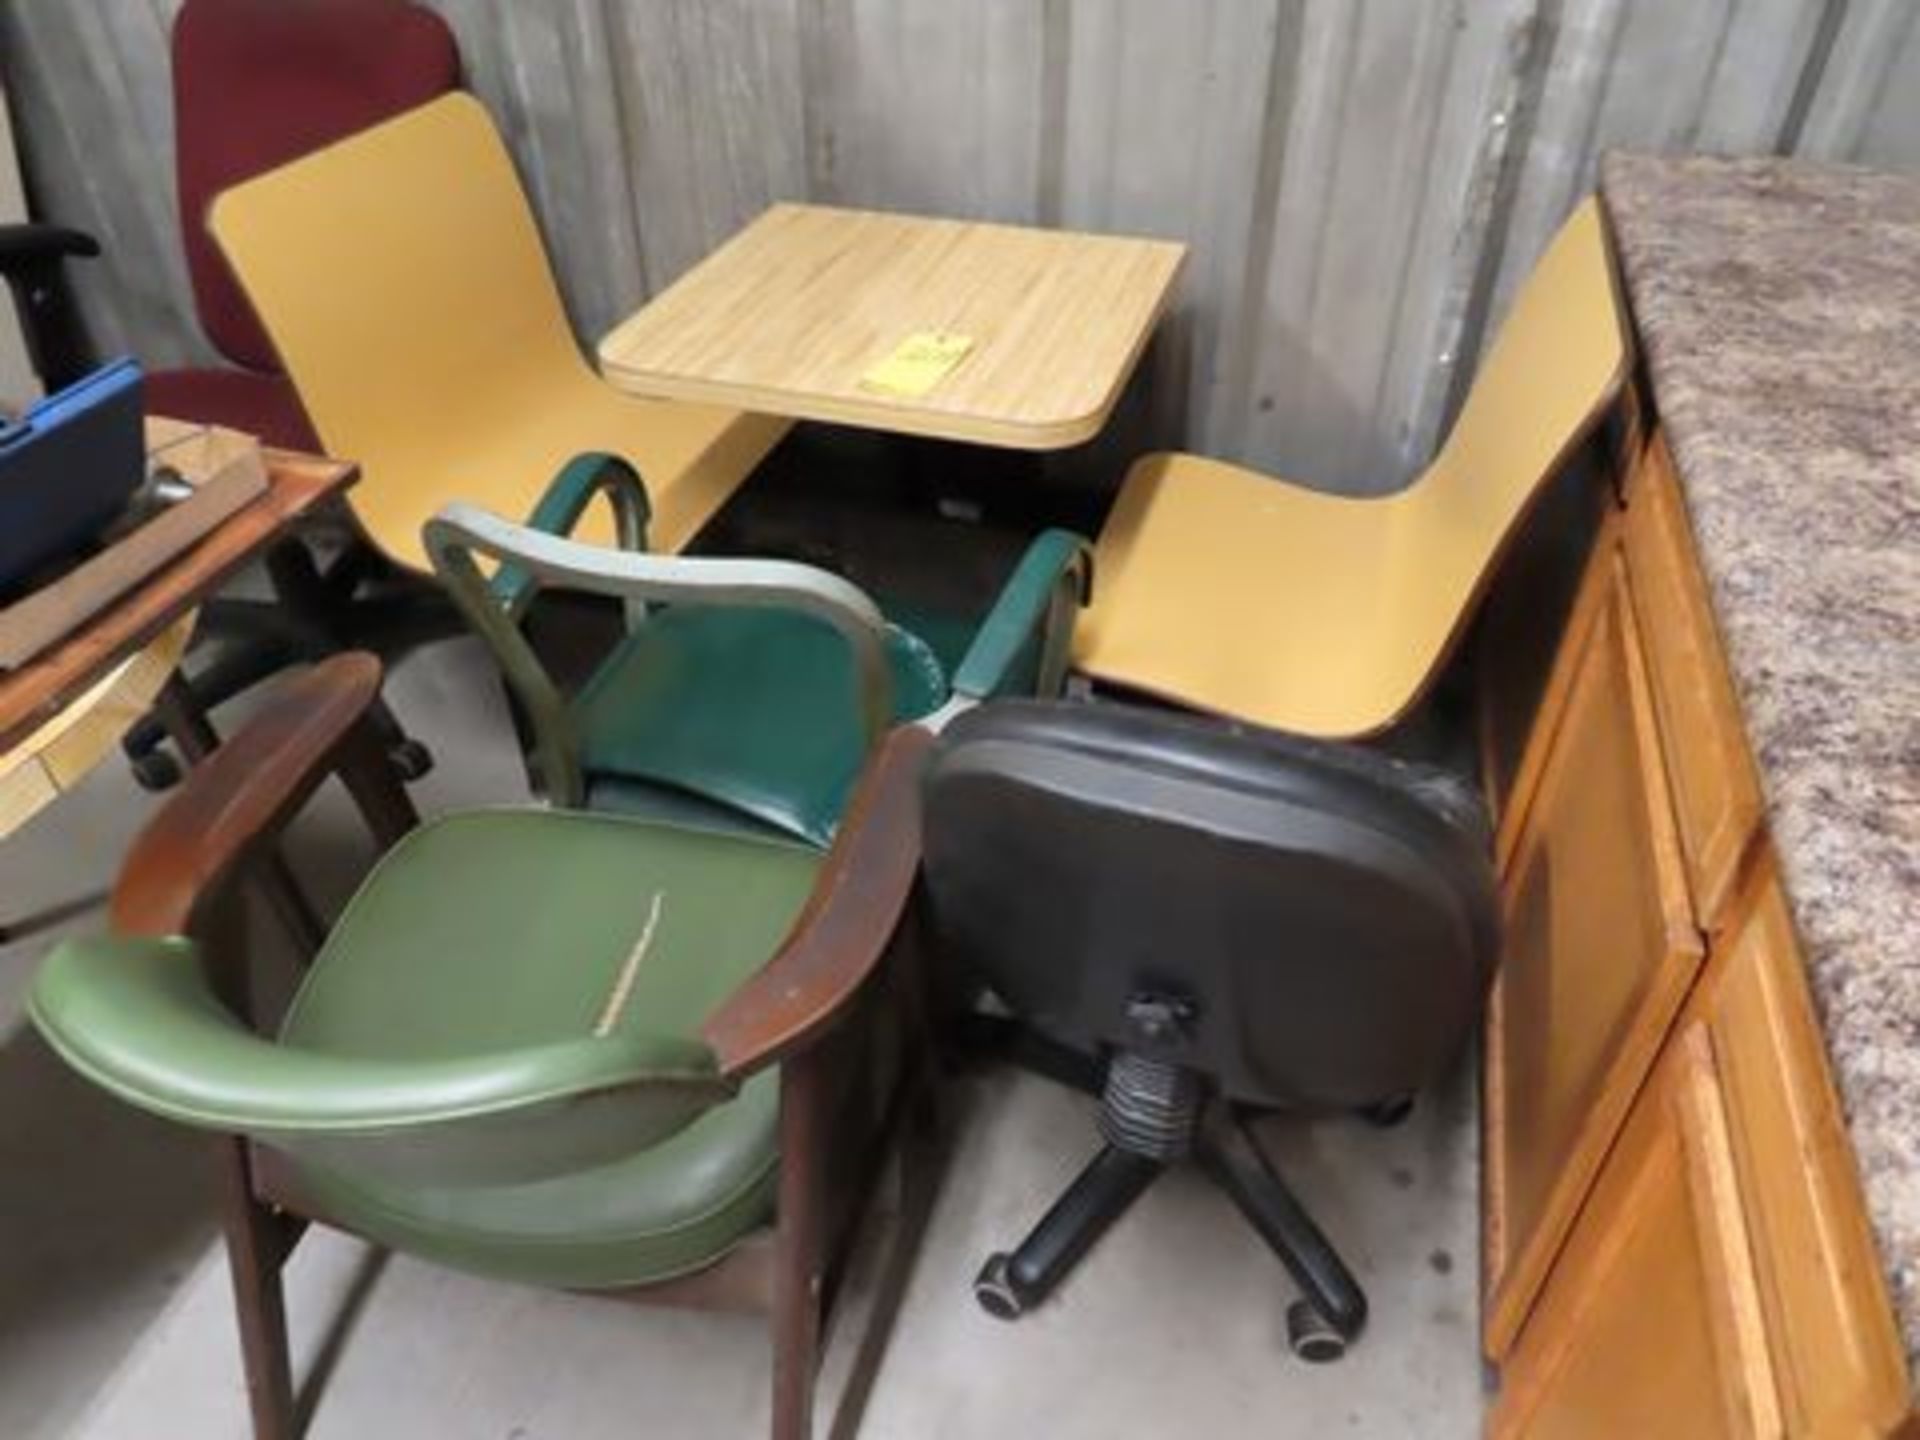 REMAINING ITEMS IN BREAK ROOM - DINING TABLE, MISC. CHAIRS, 2-SEAT BENCH, (2) FOLDING TABLES, METAL